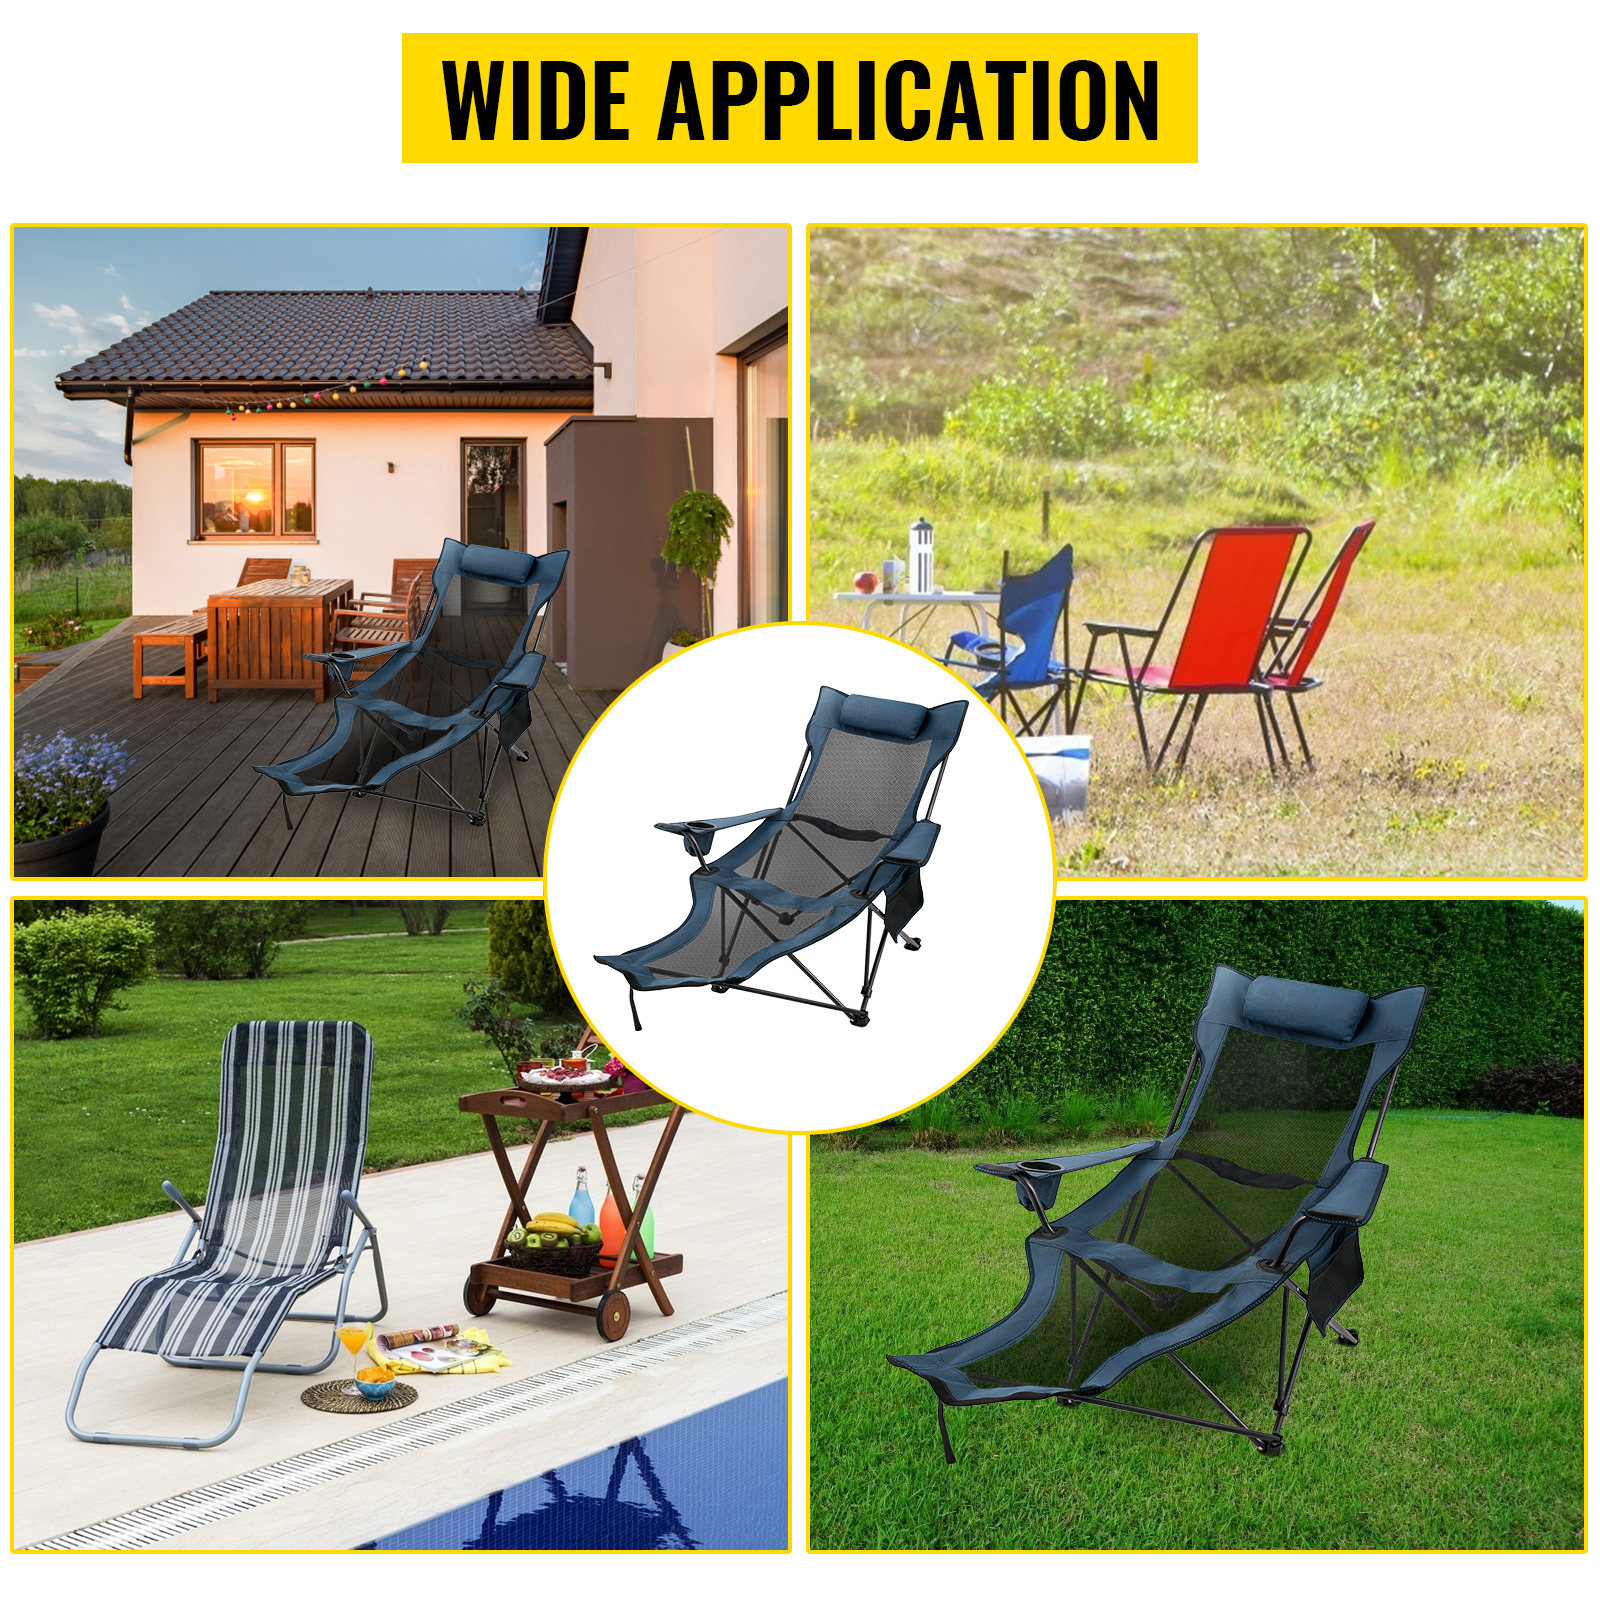 Portable Camping Chairs Compact Folding Chair Small Camp Foot Rest